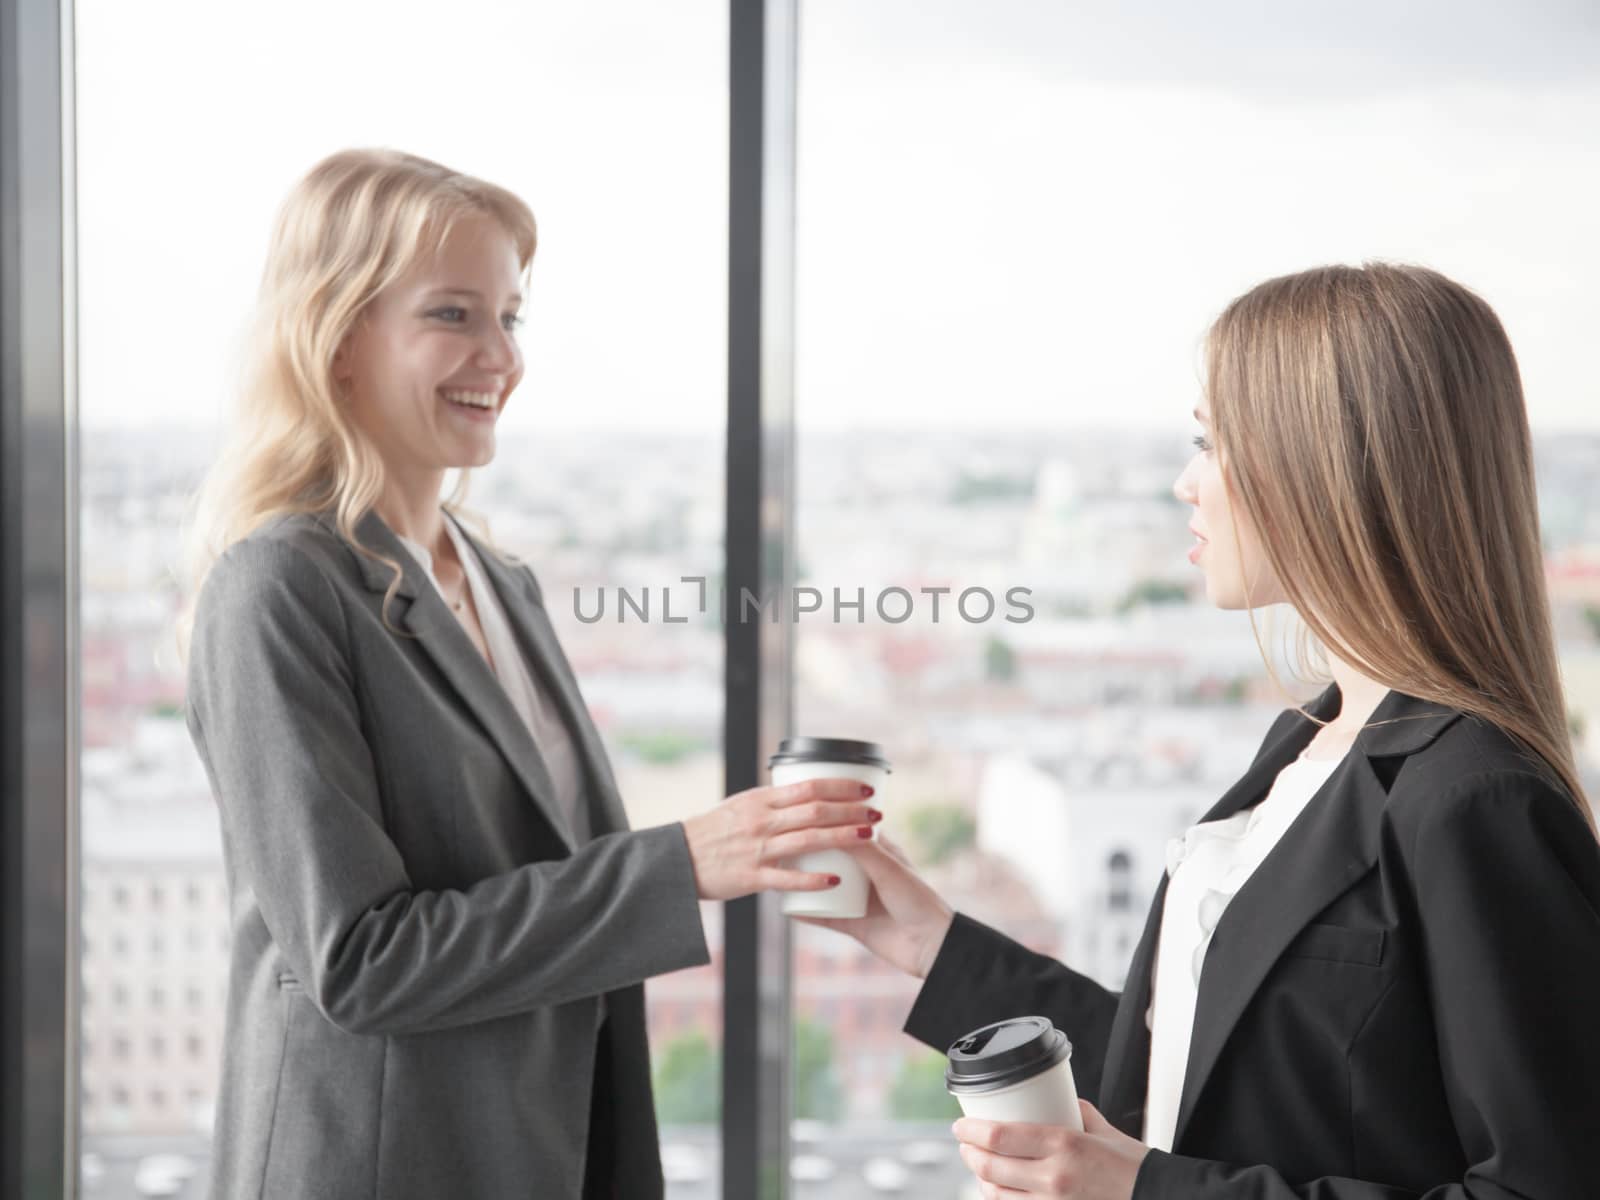 Business woman offering coffee to colleague in office with panoramic windows with view at city